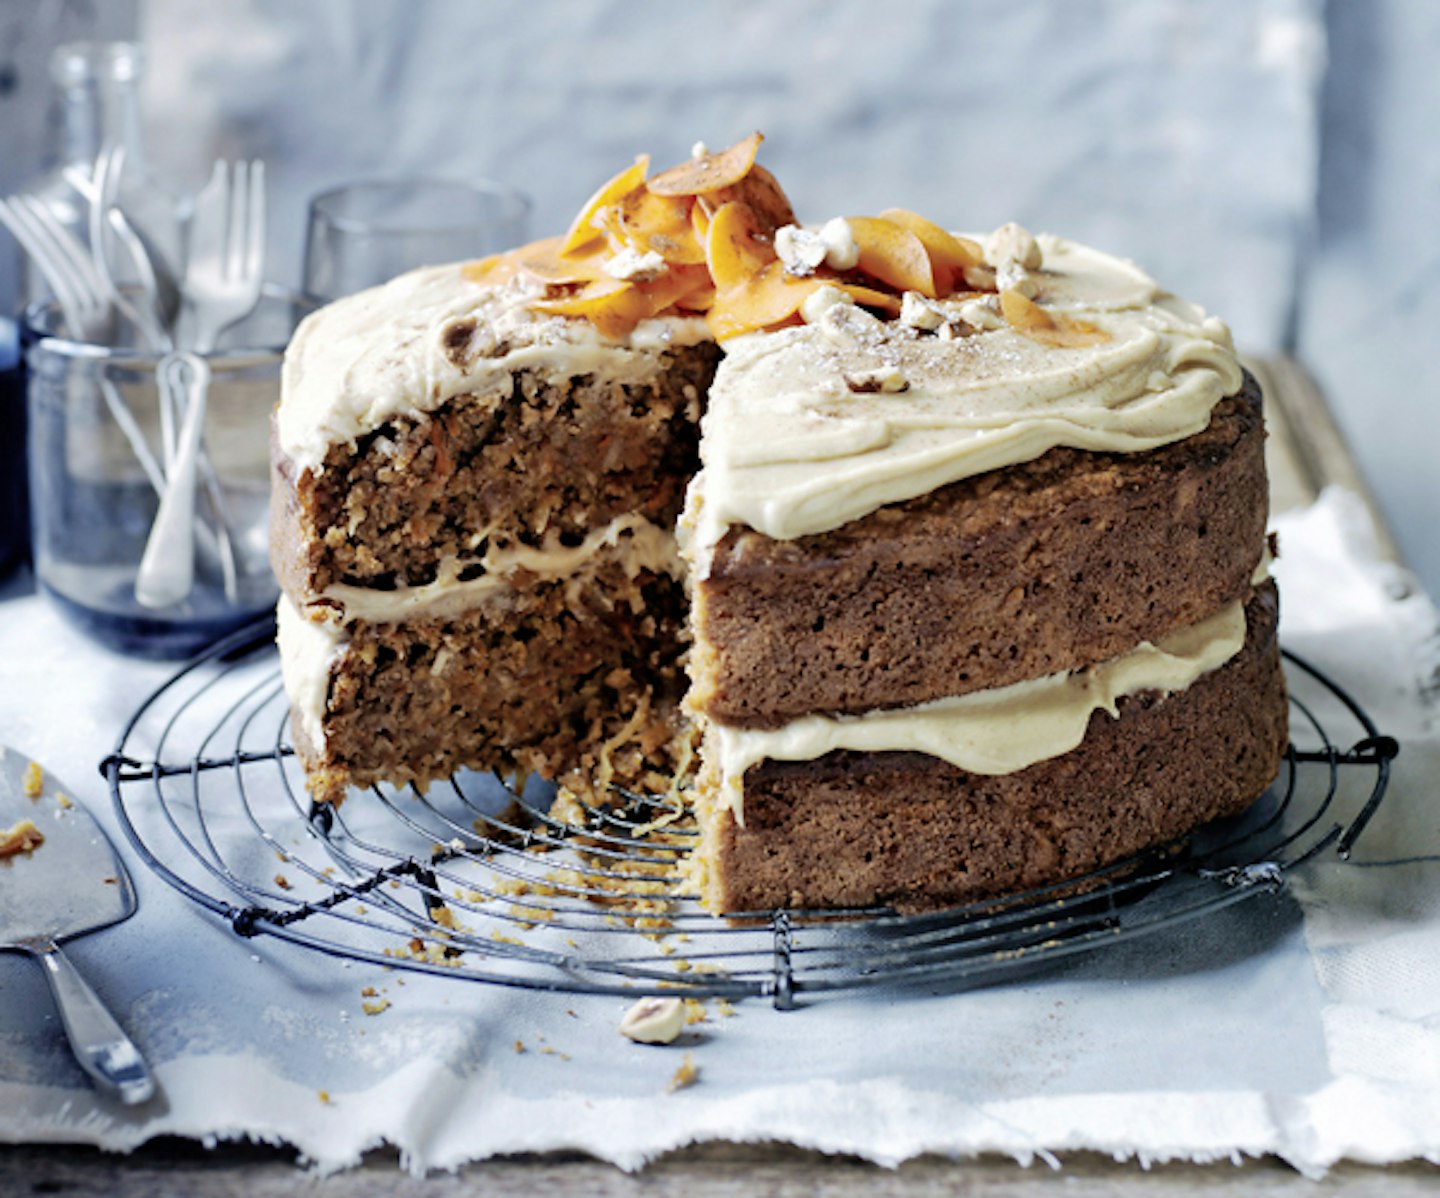 How To Make Our Favourite Carrot Cake